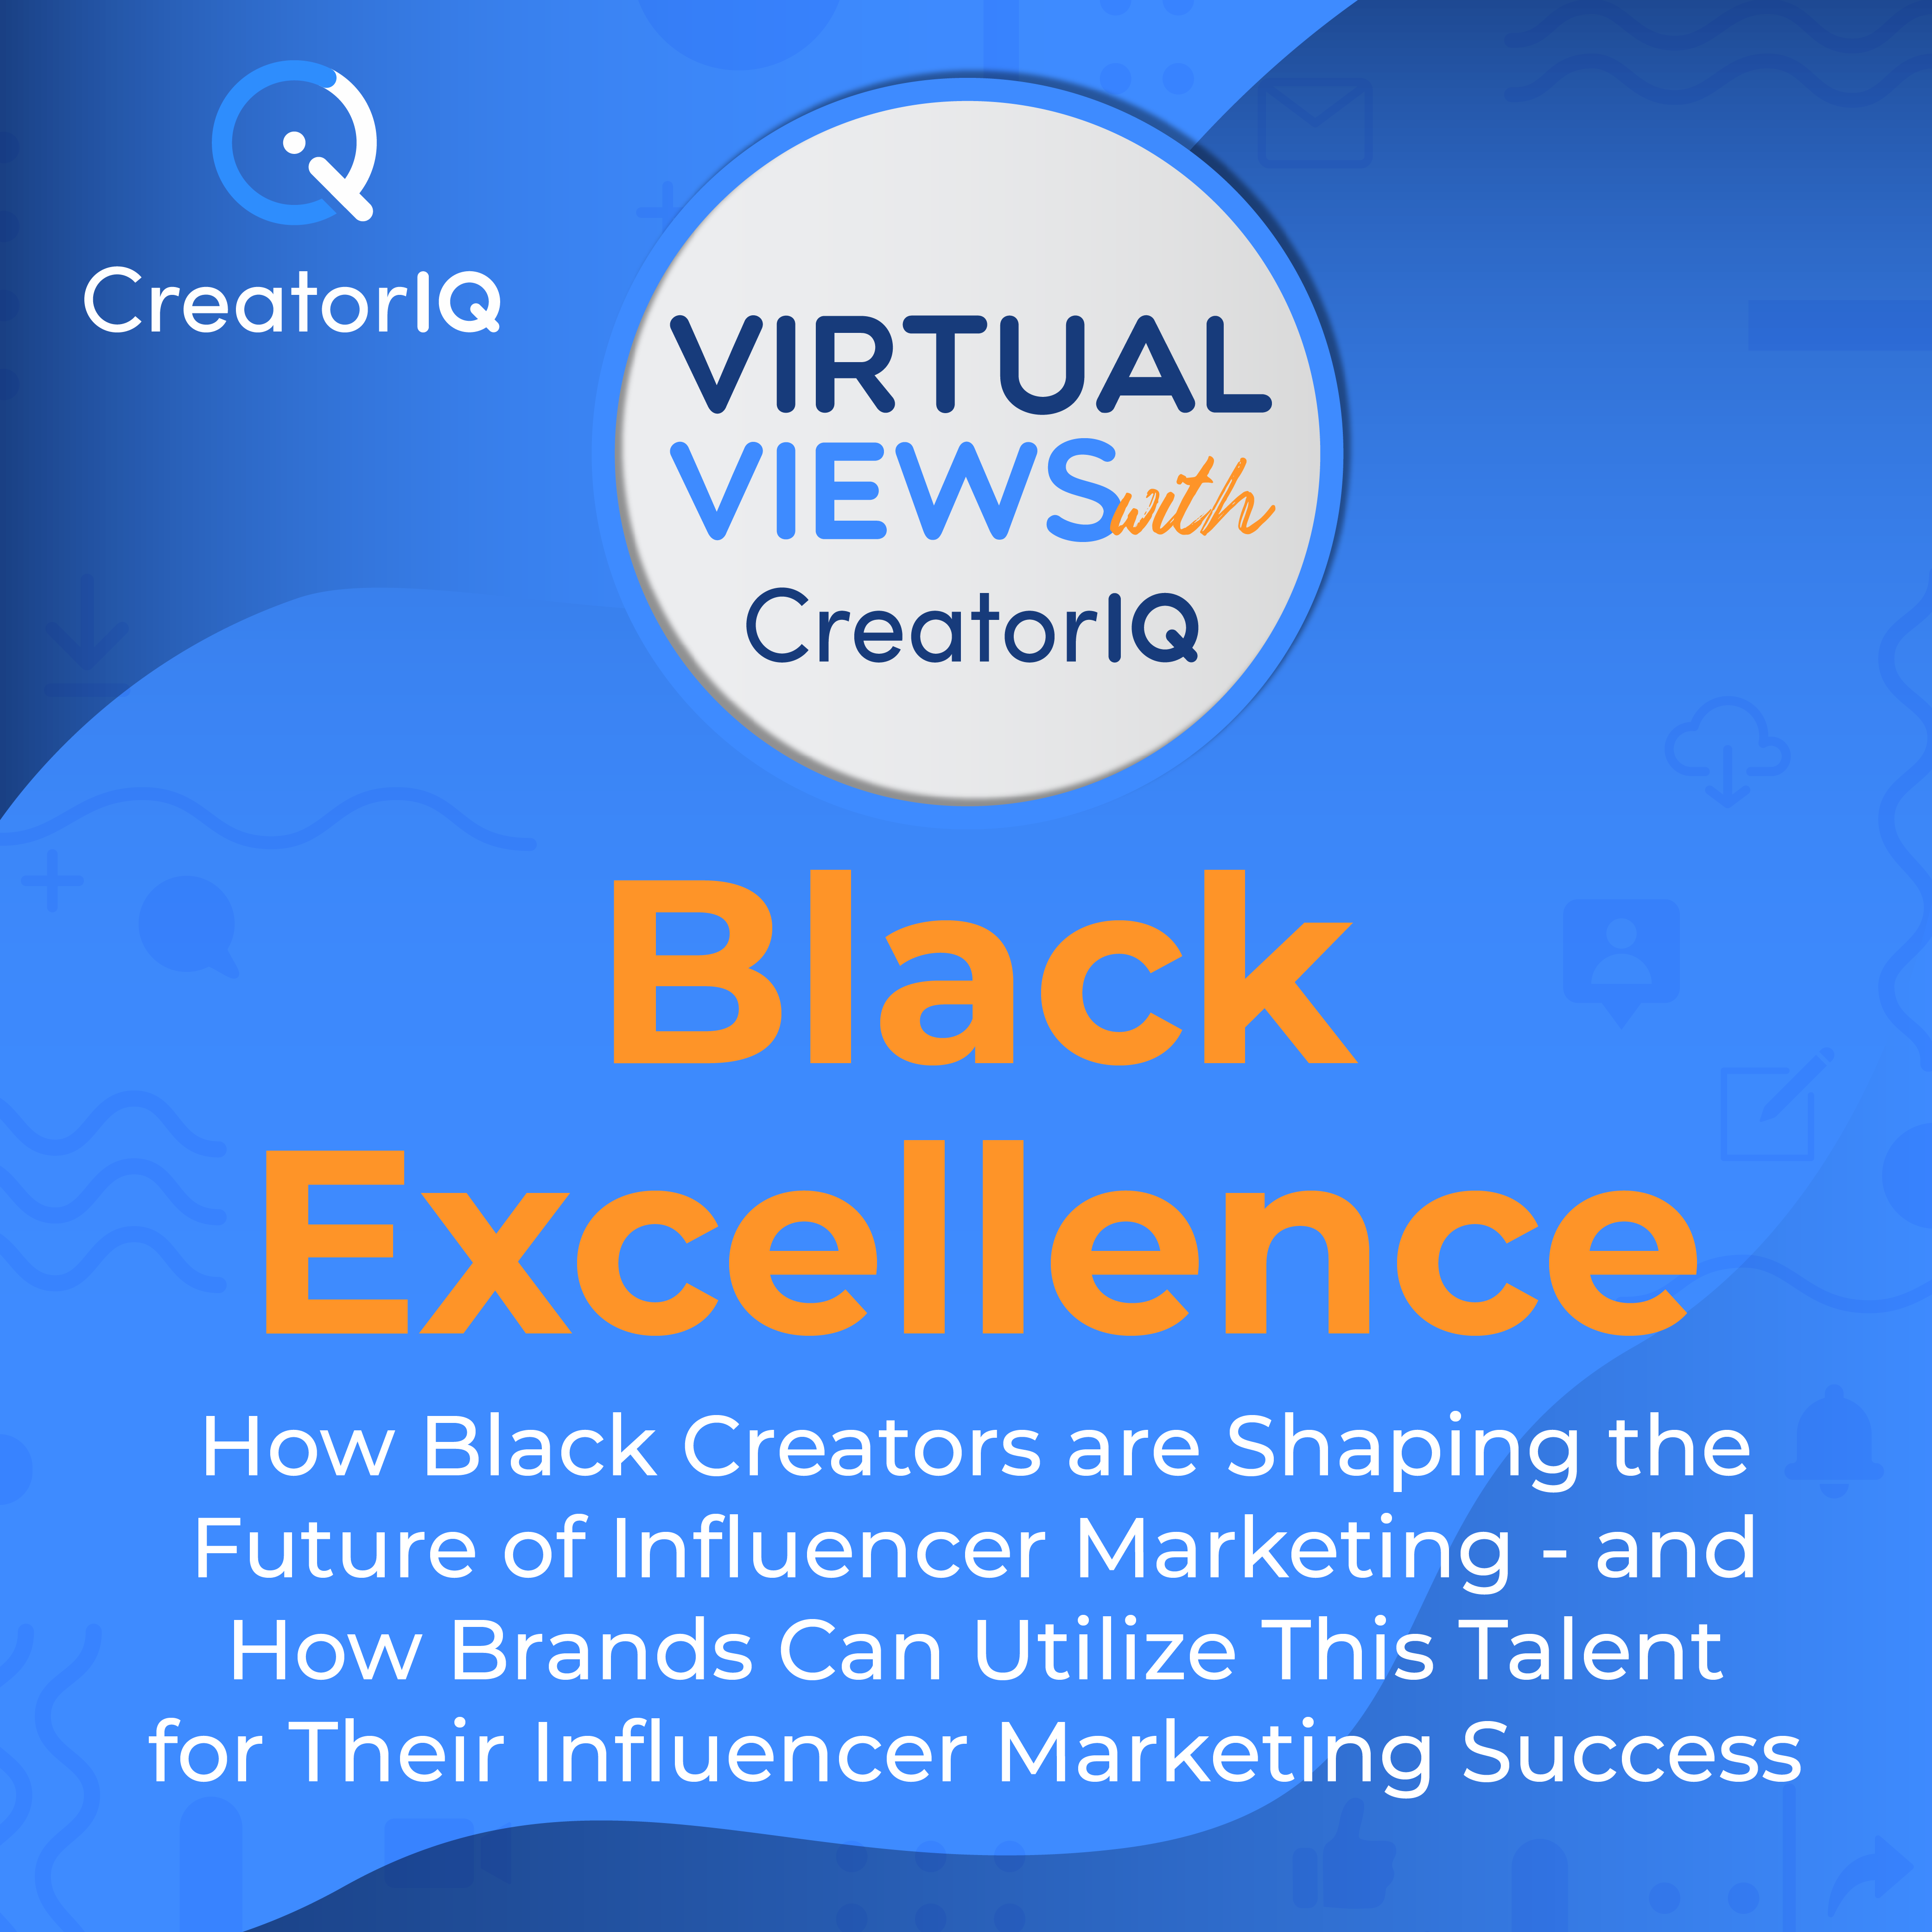 Virtual Views with CreatorIQ: Black Excellence: How Black Creators are Shaping the Future of Influencer Marketing